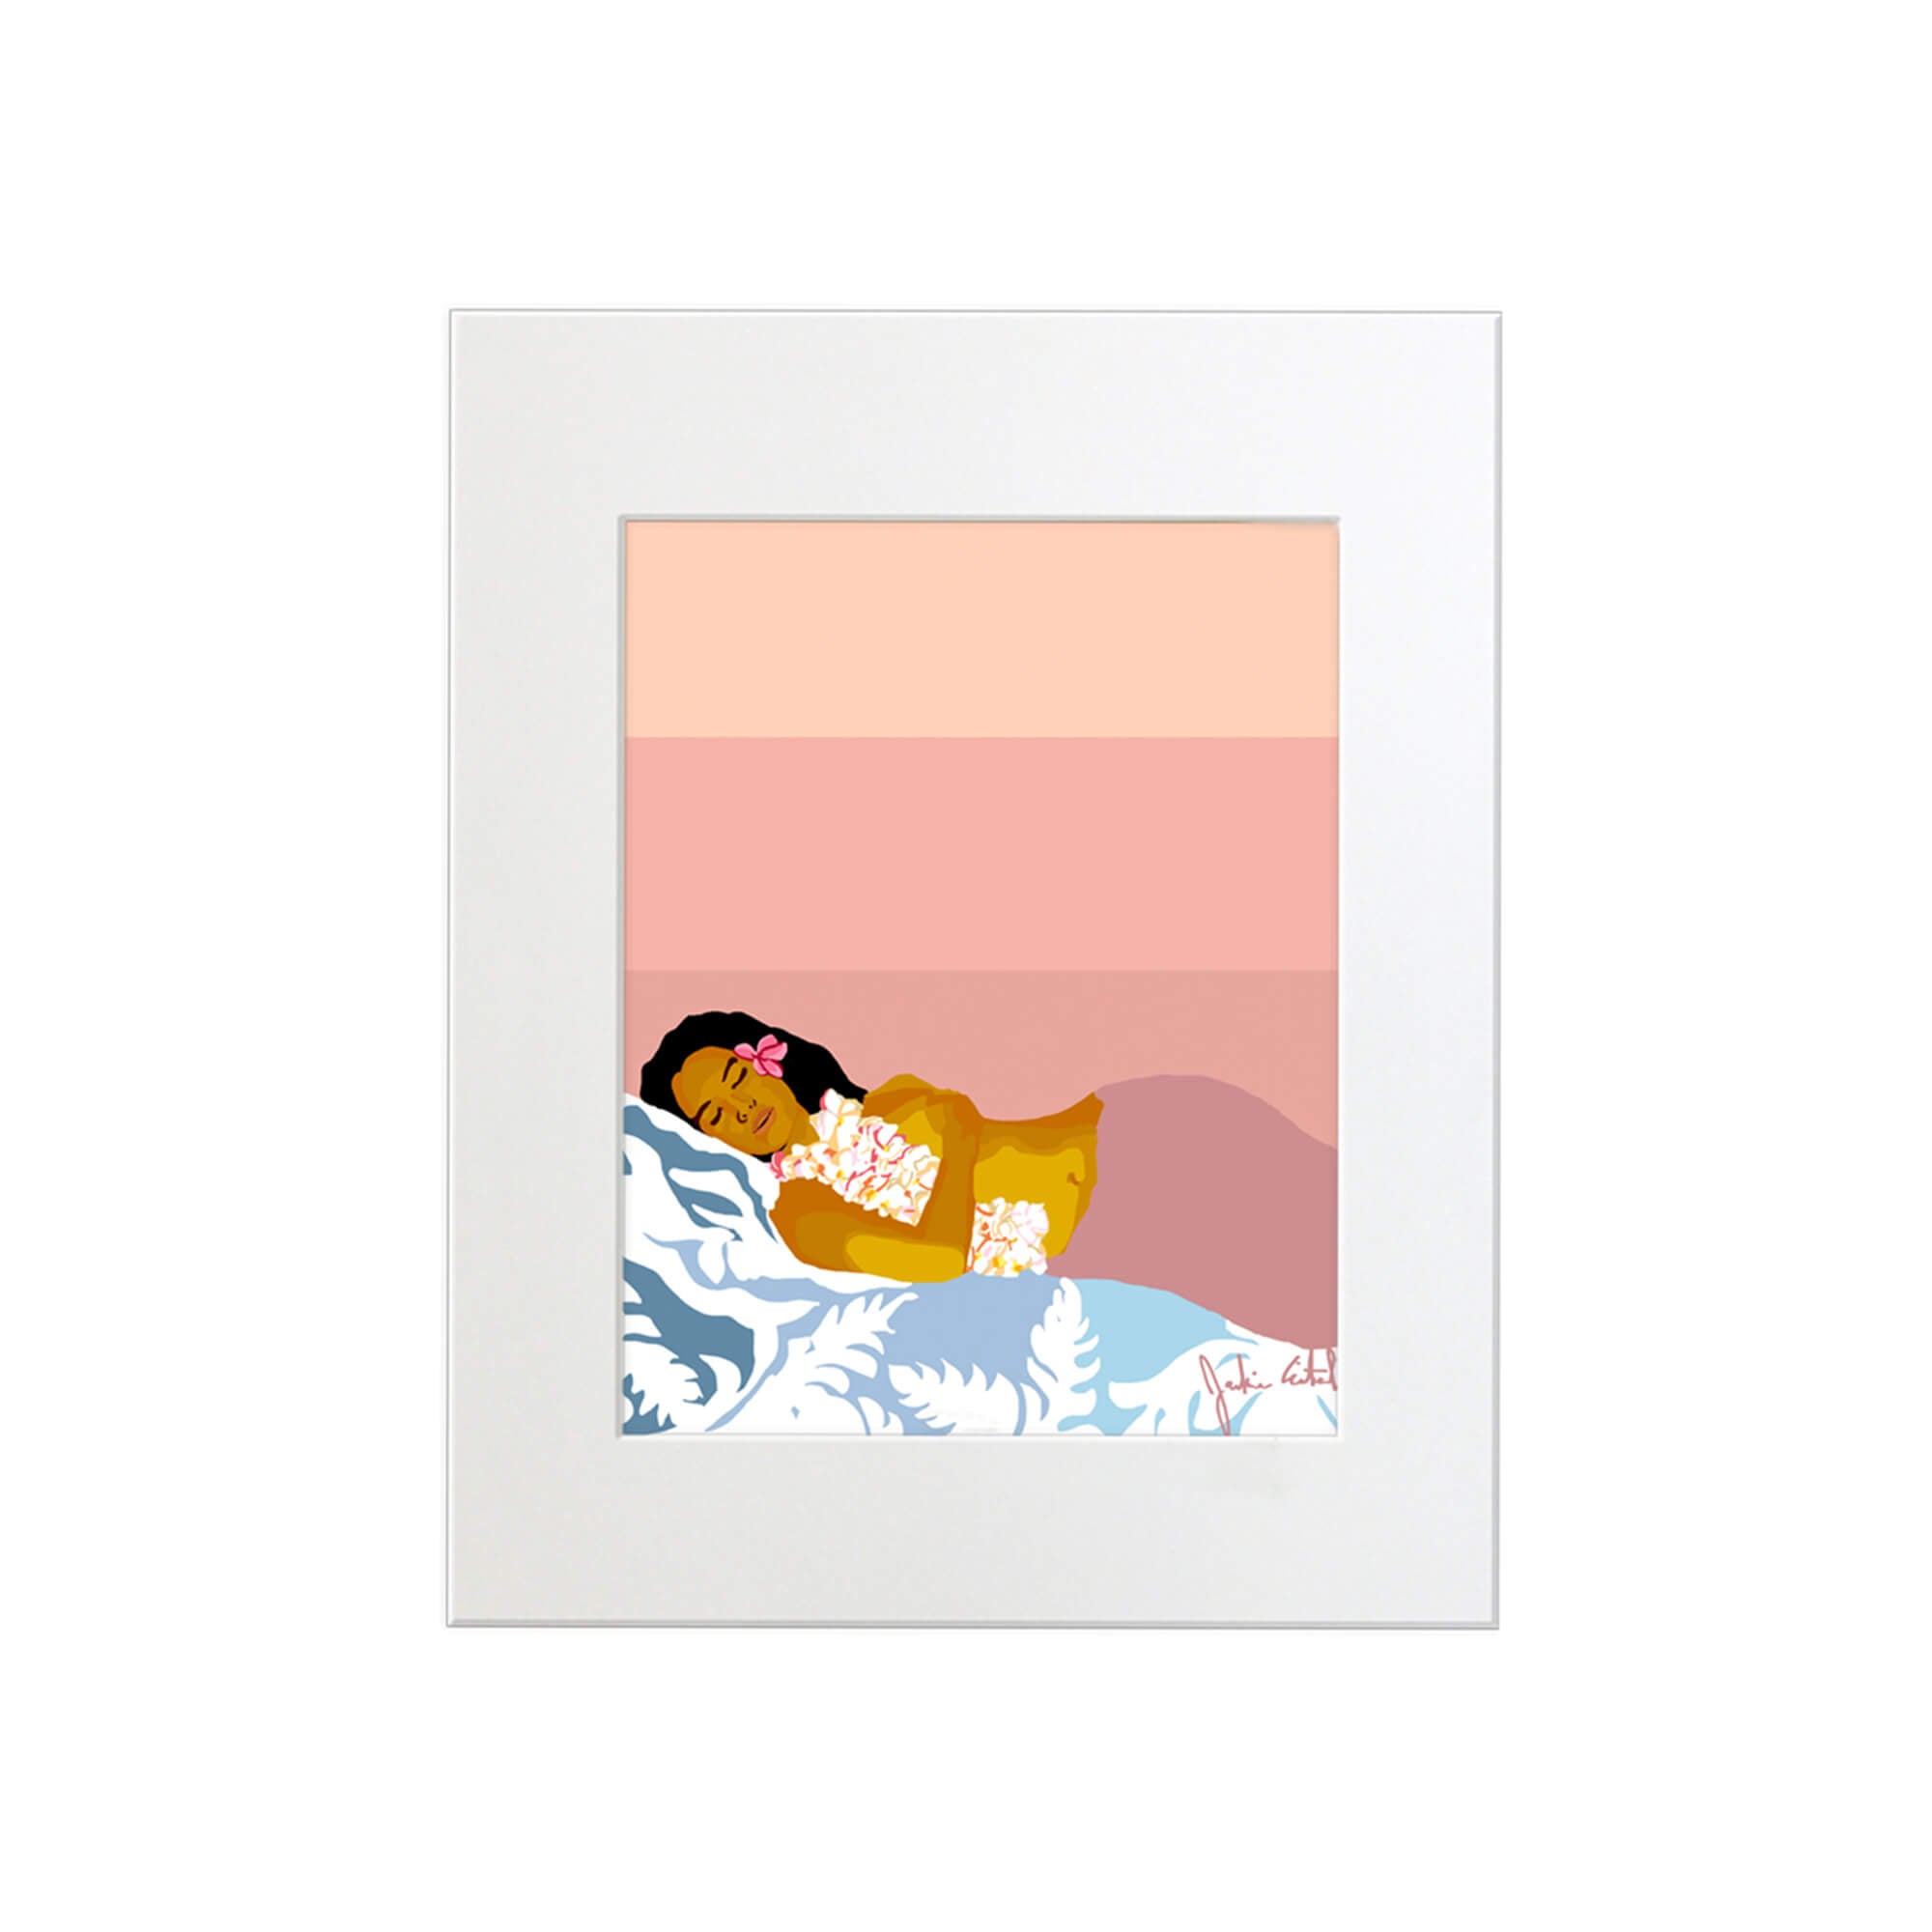 A matted art print featuring a local Hawaiian woman wearing a flower lei while sleeping peacefully by Hawaii artist Jackie Eitel